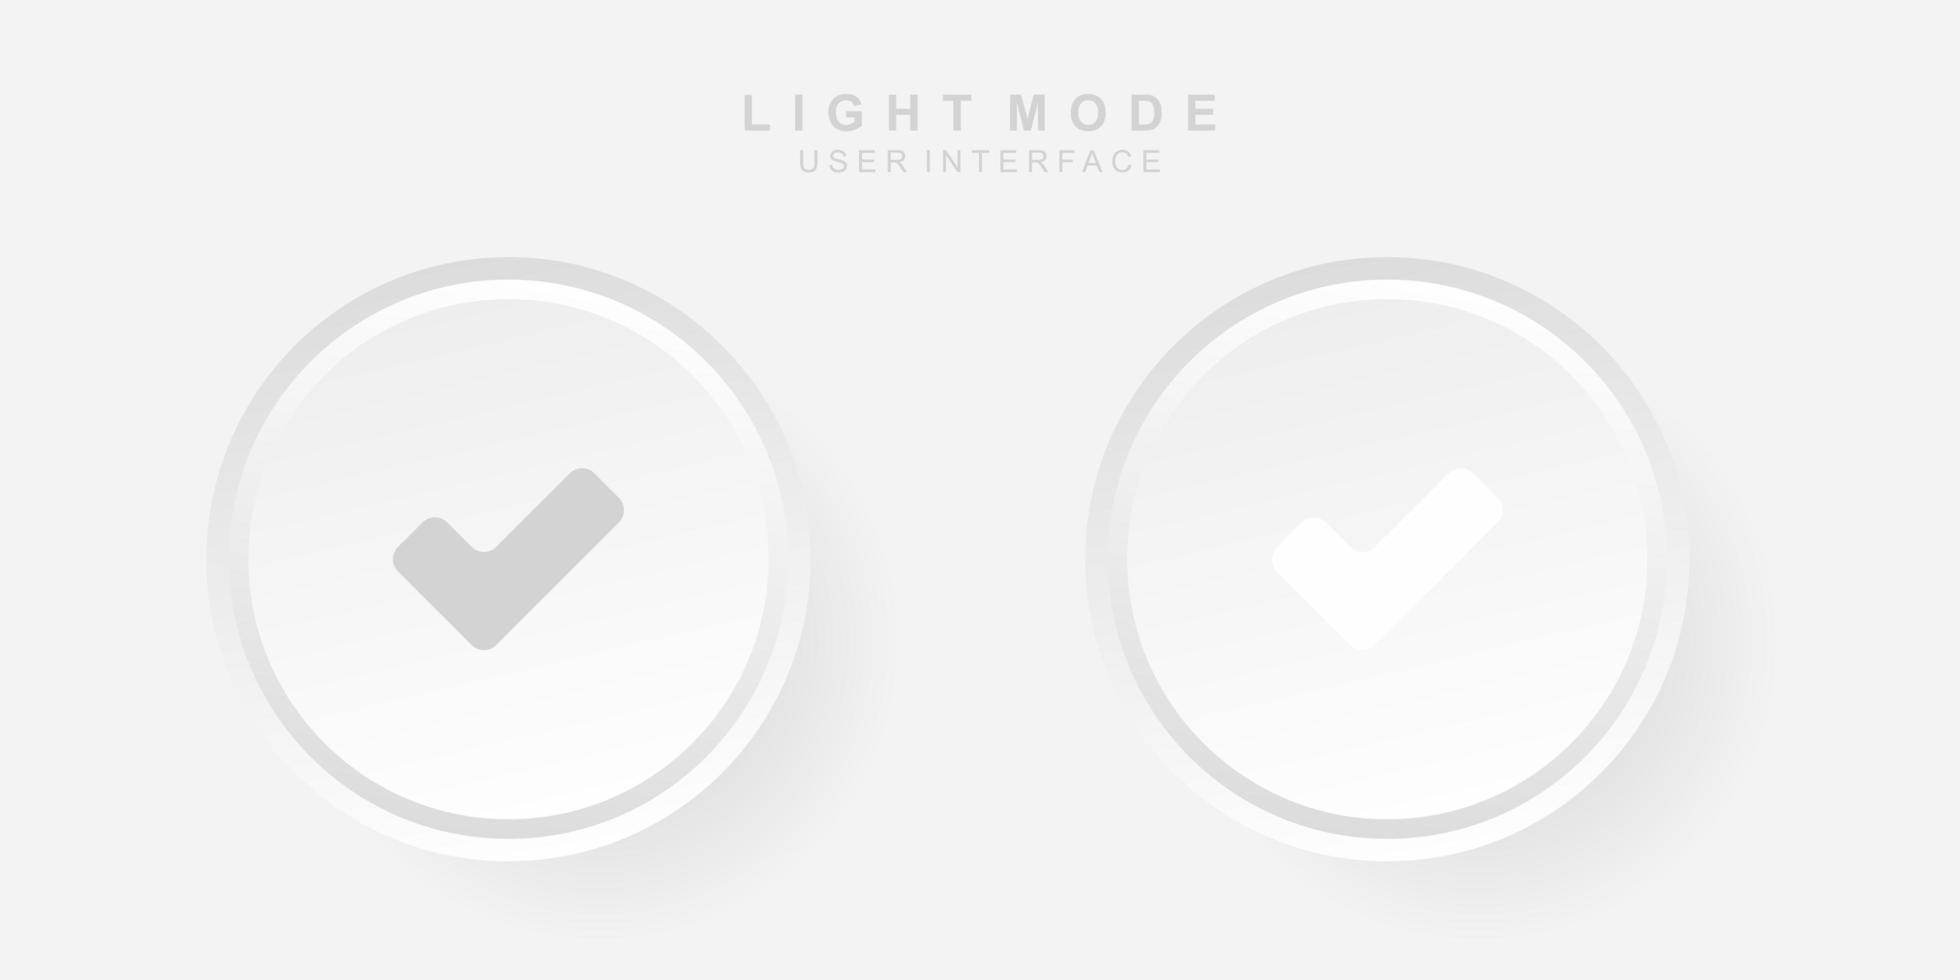 Simple Creative Correct User Interface in Neumorphism Design. Simple modern and minimalist. vector